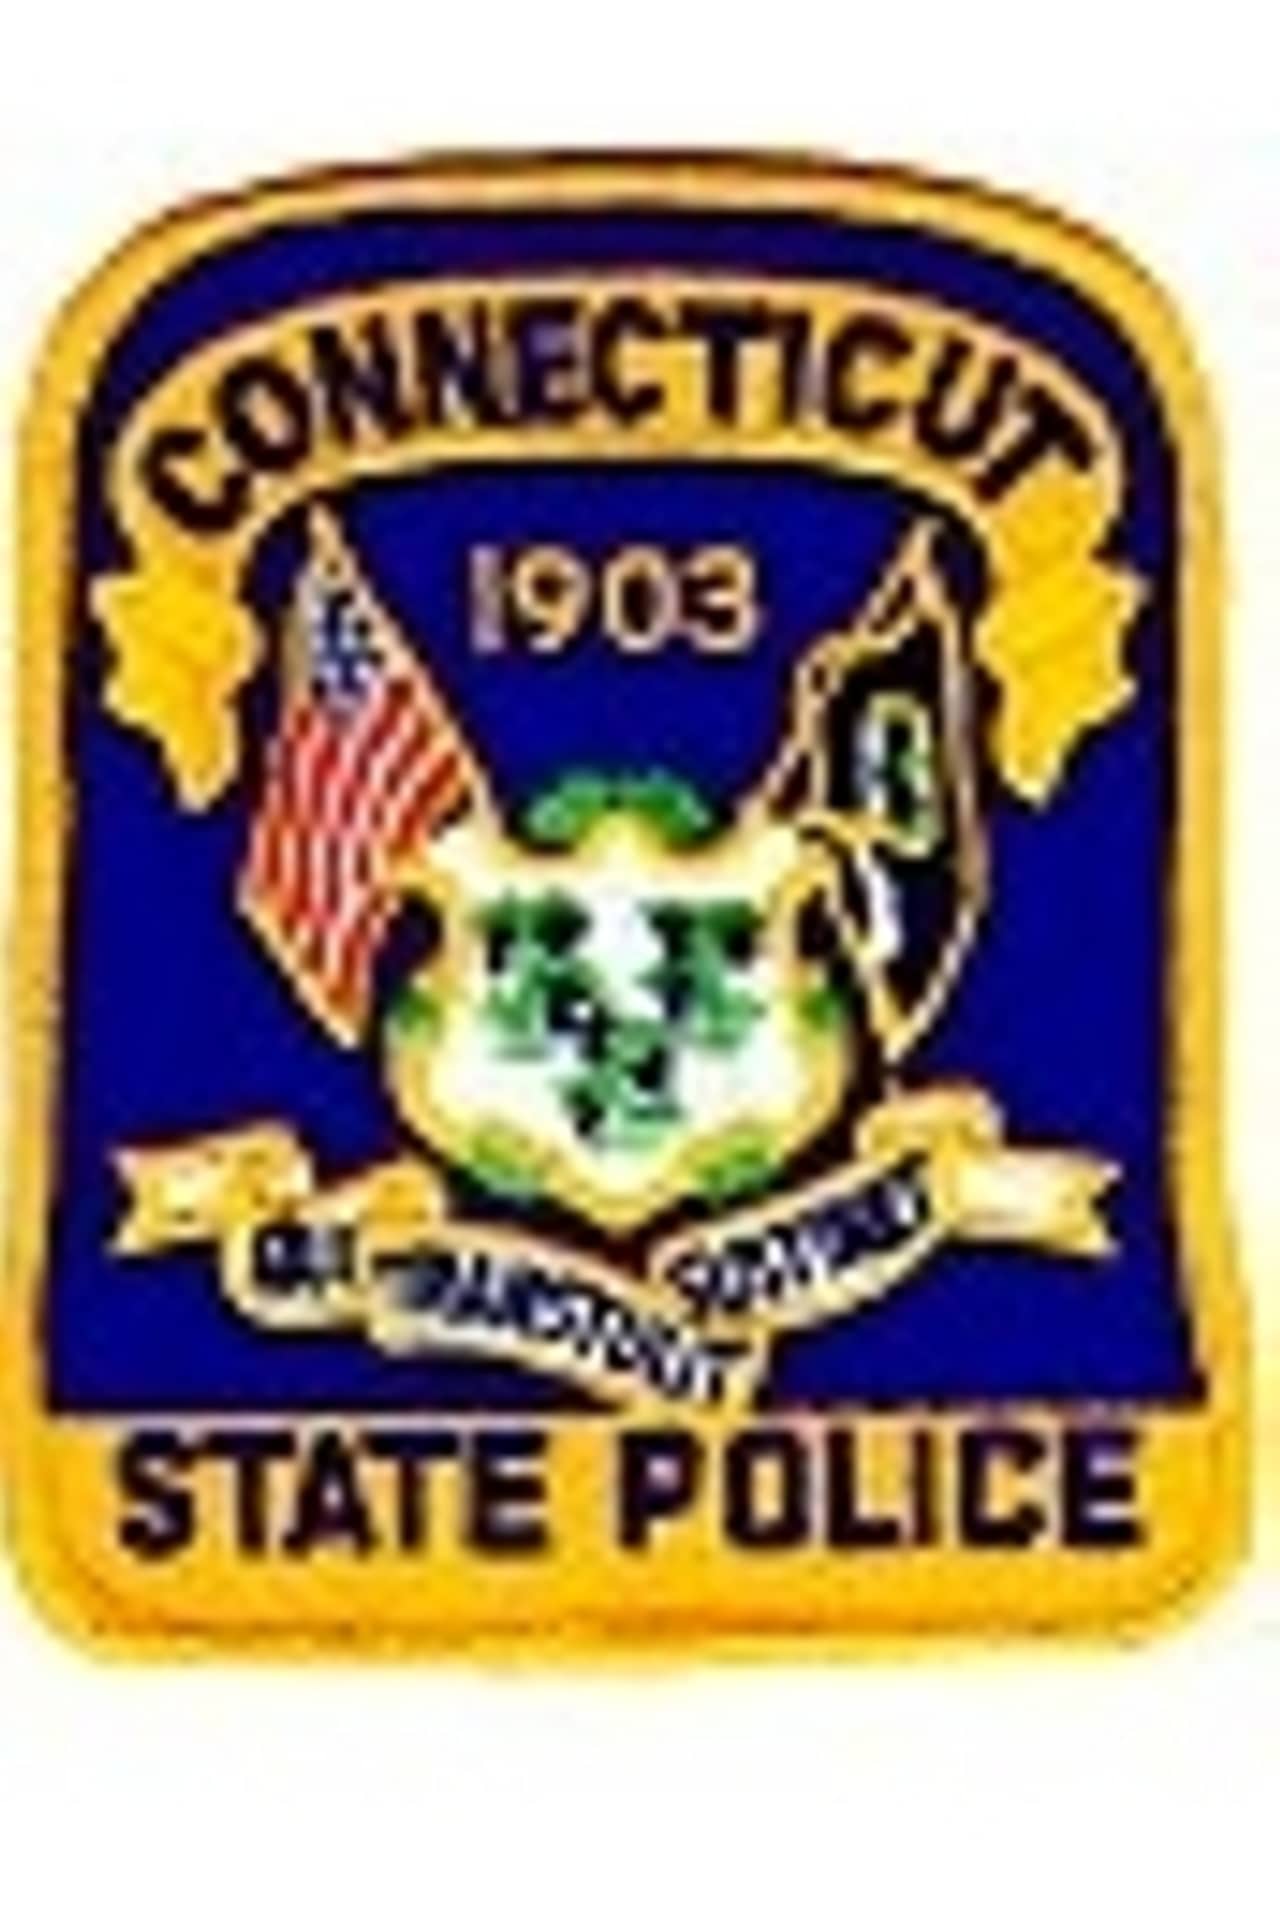 The Connecticut State Police reportedly charged a driver in an alleged road rage incident.